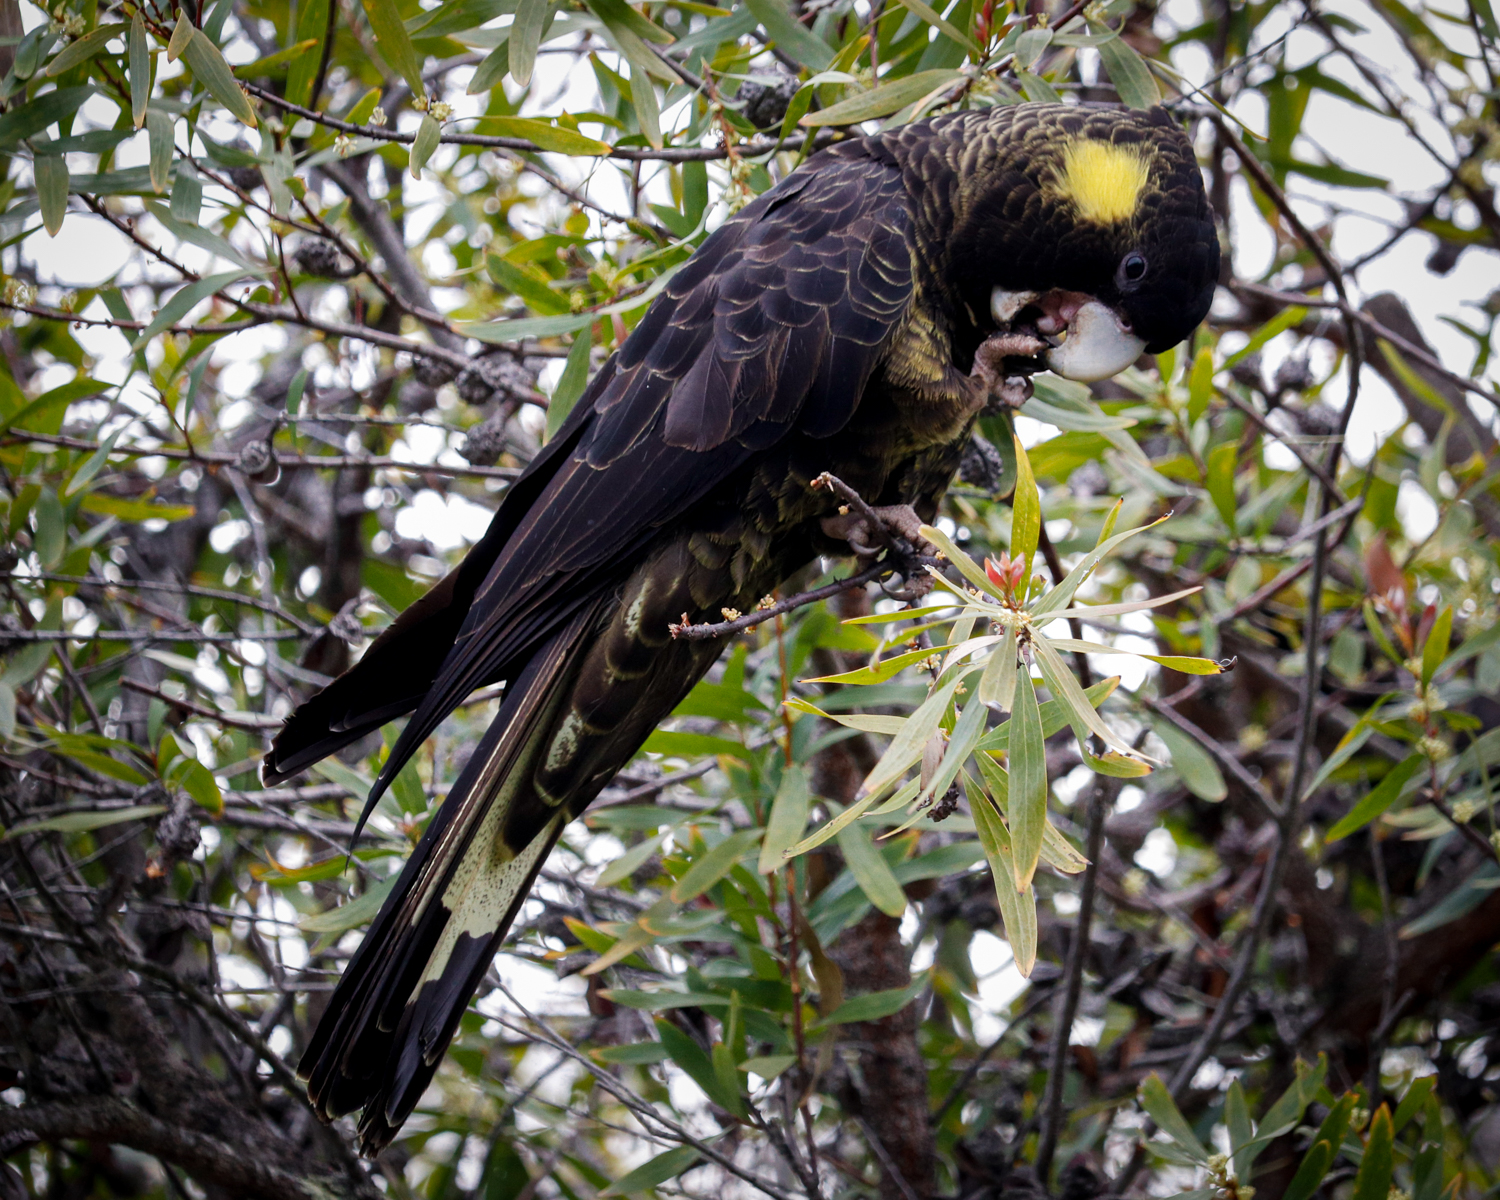 A black cockatoo in a tree eating a seed pod